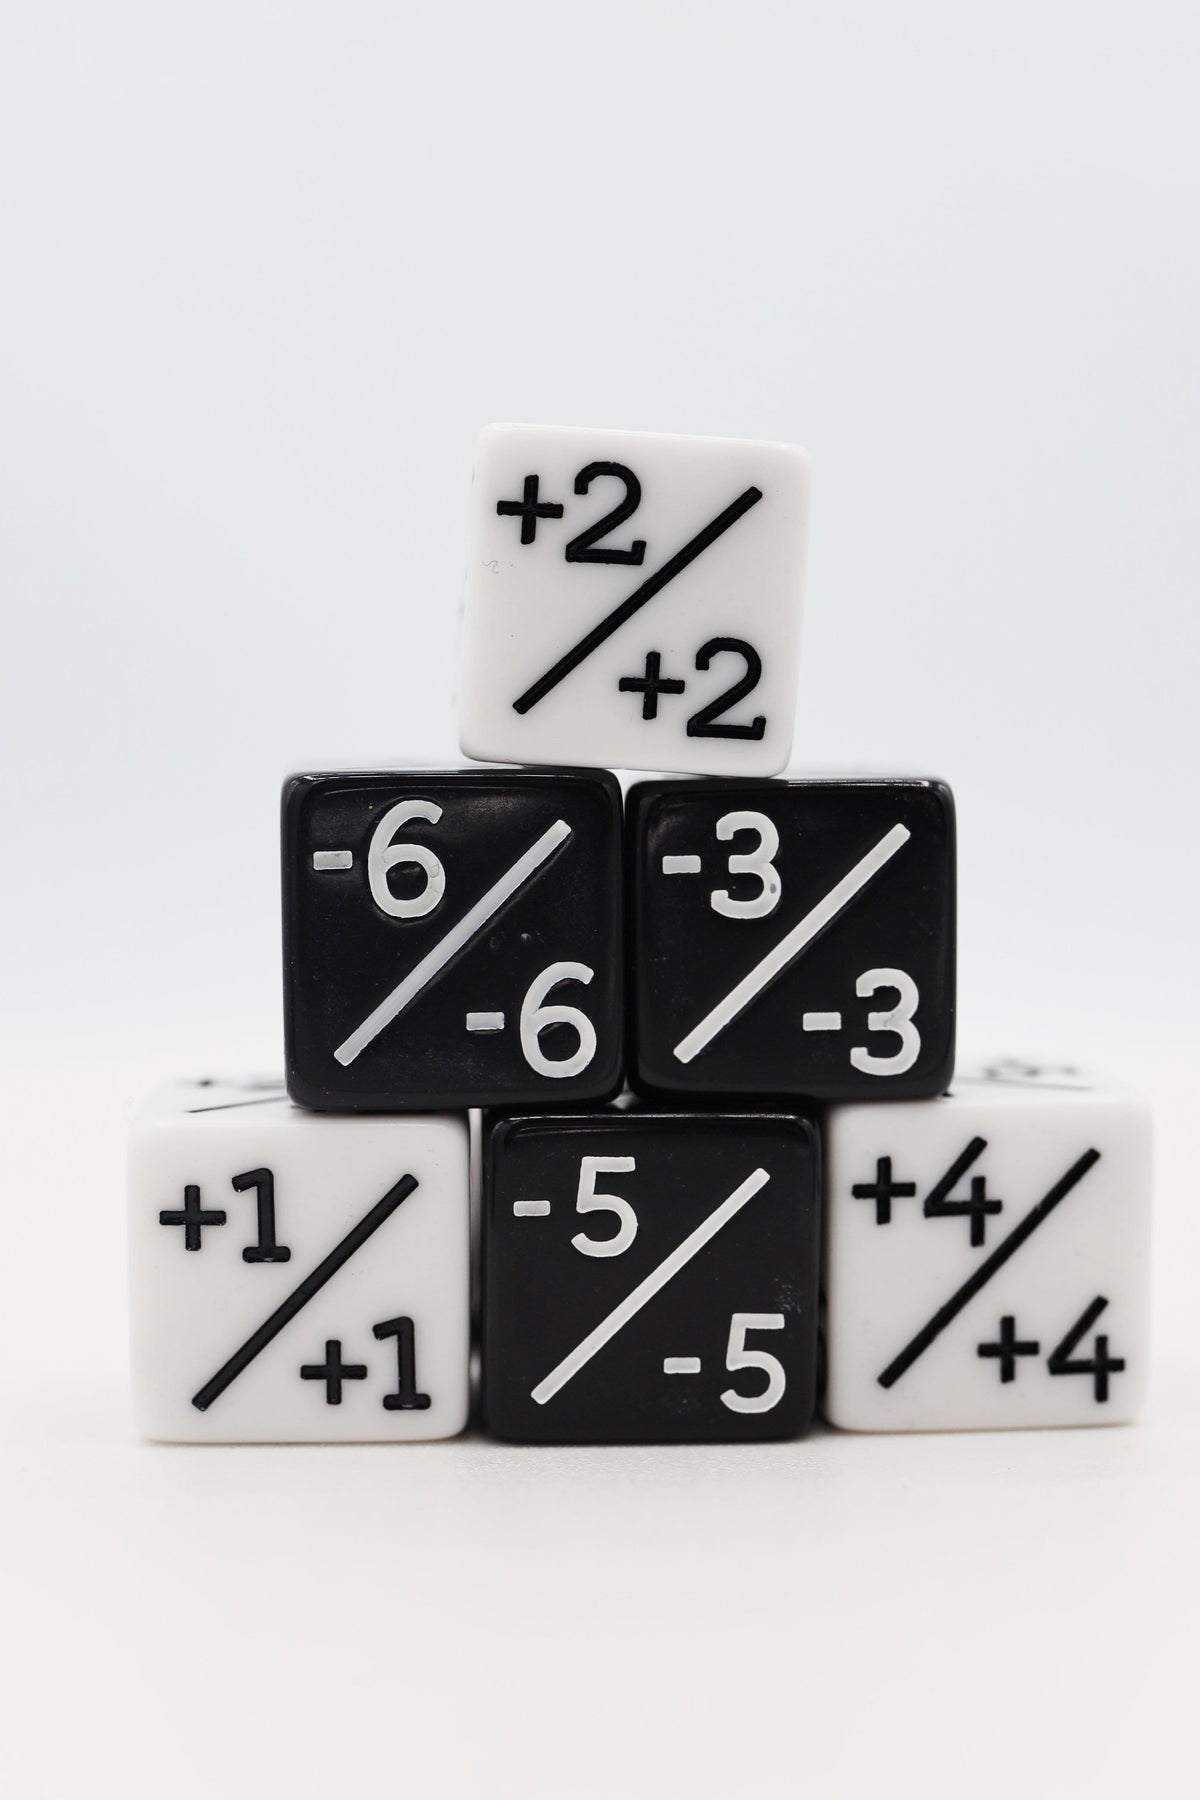 Dice +1/-1 Counters Variety Pack (8ct)